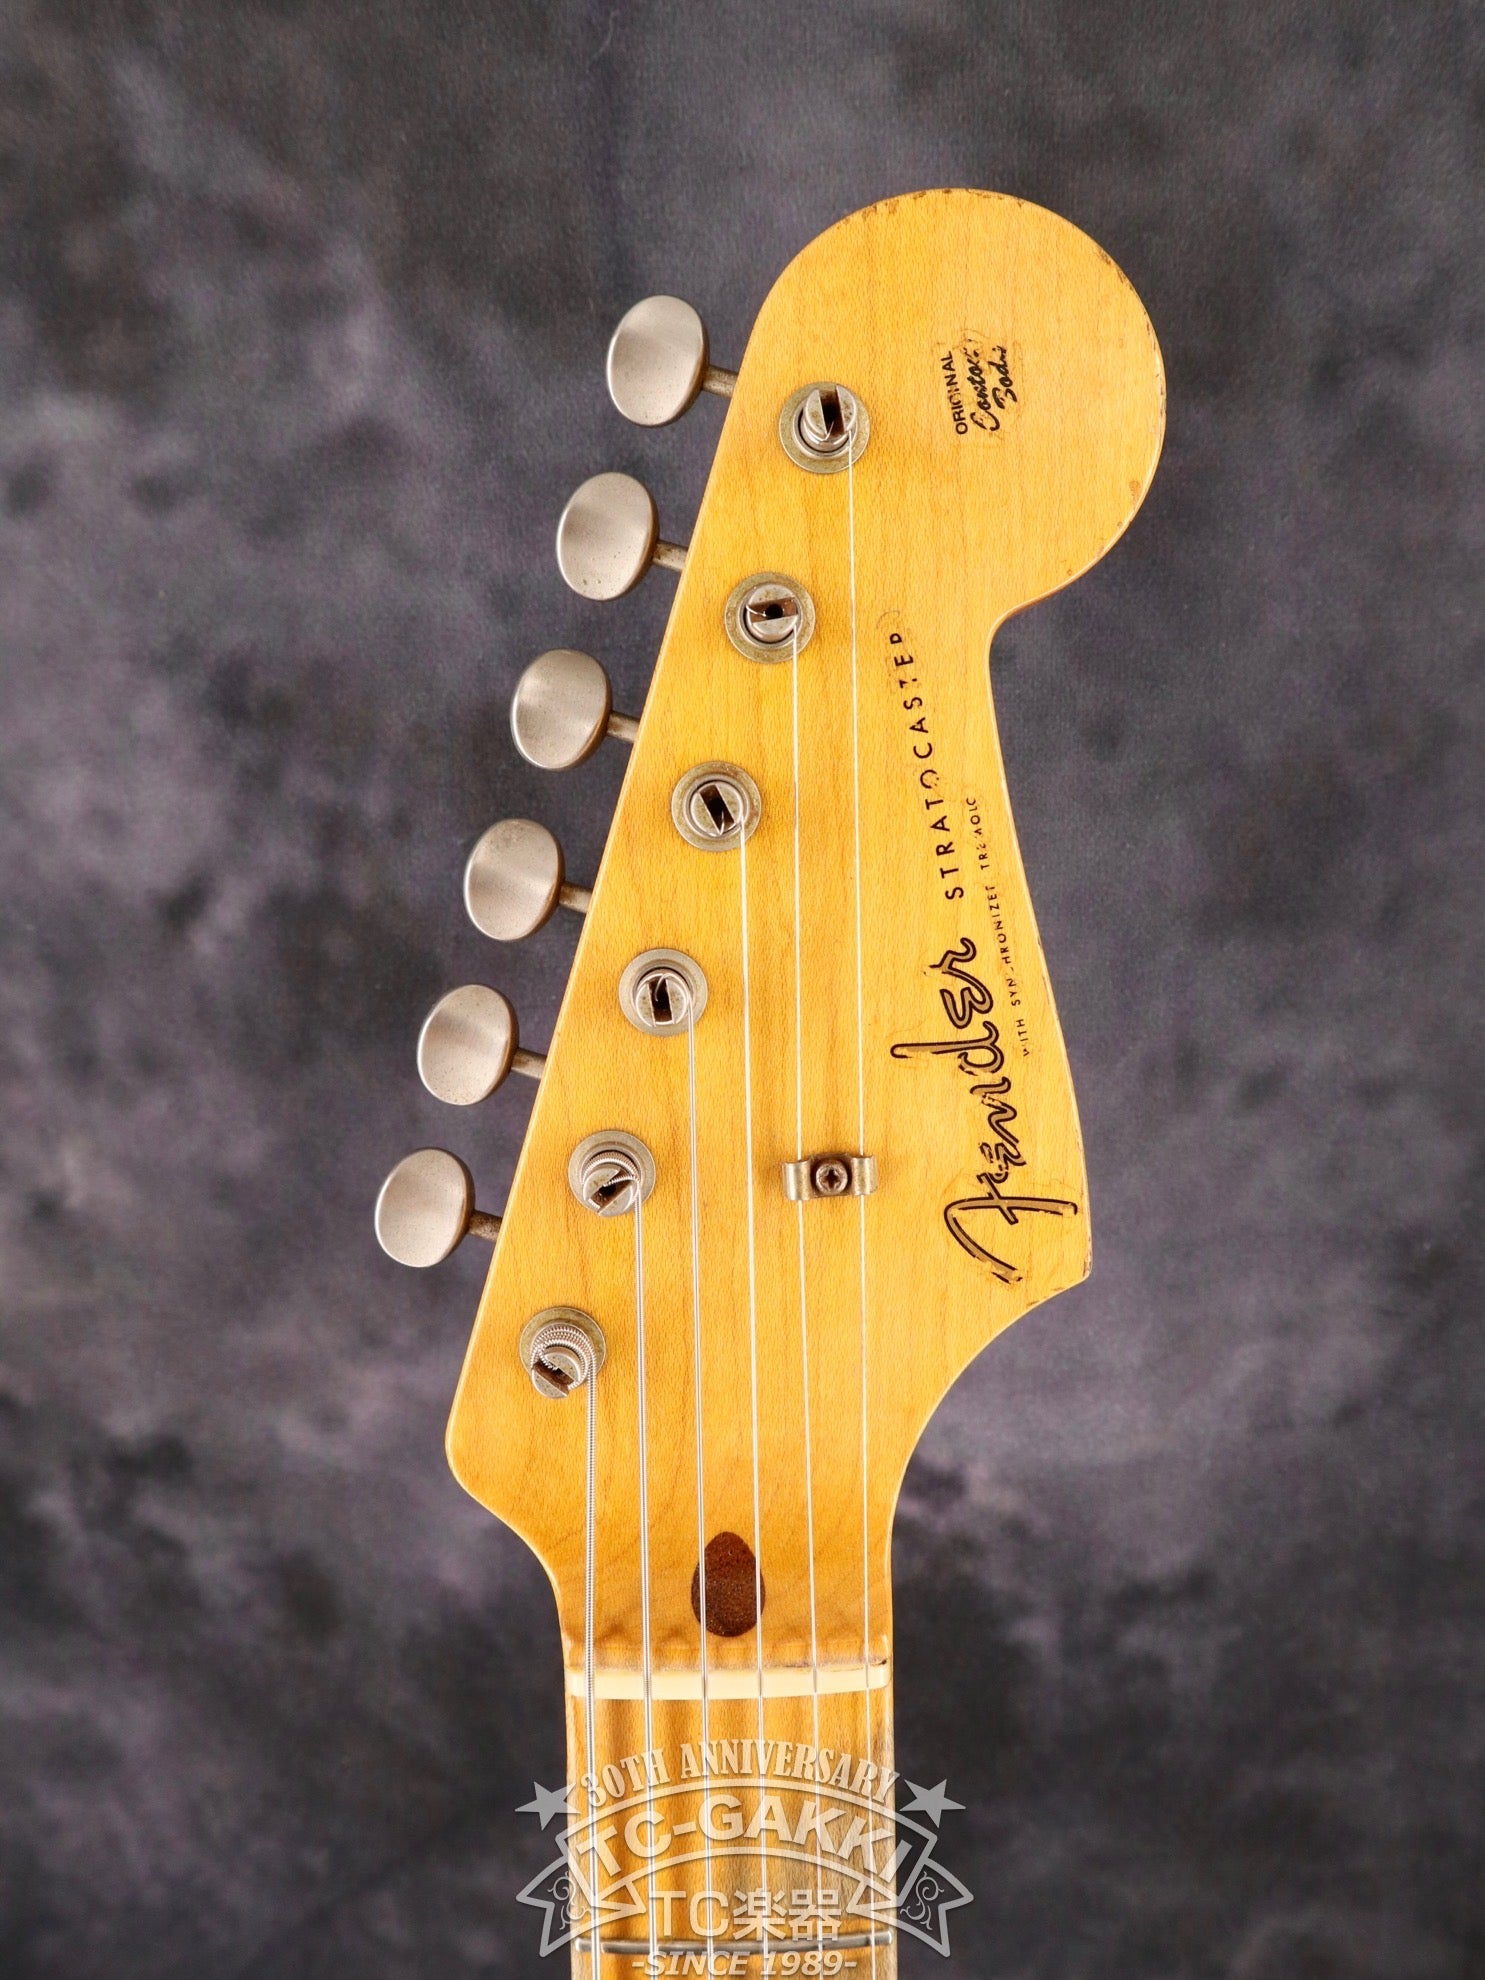 1958 Stratocaster Relic Master Built by Paul Waller